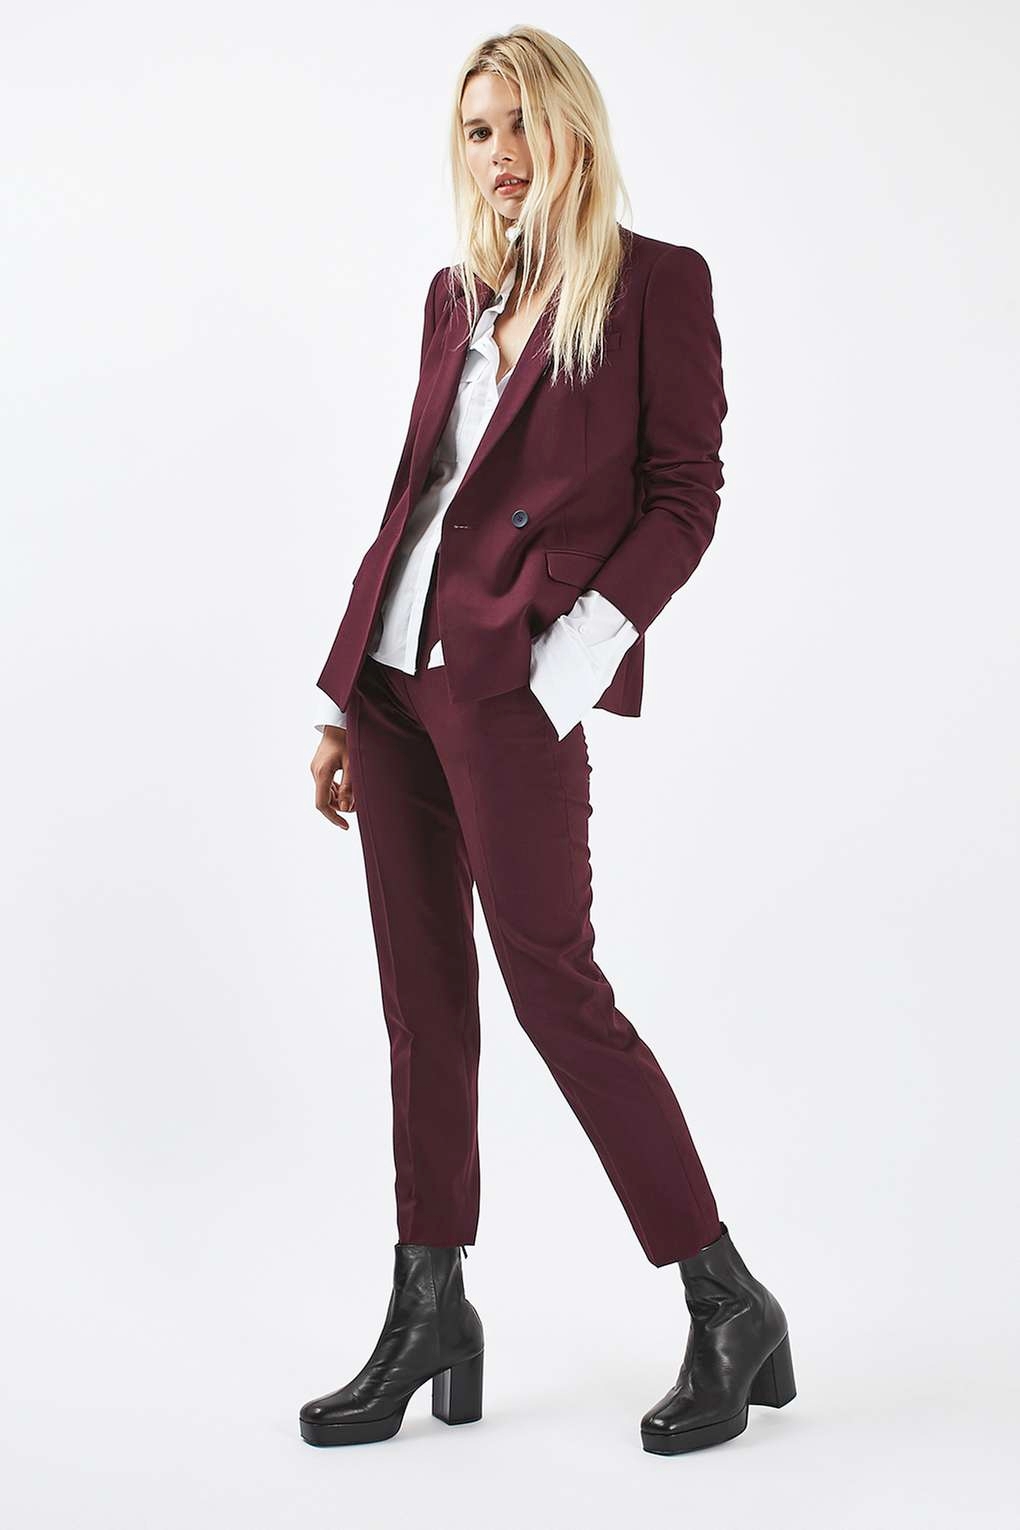 Topshop PETITE Tailored Suit Jacket and Trousers